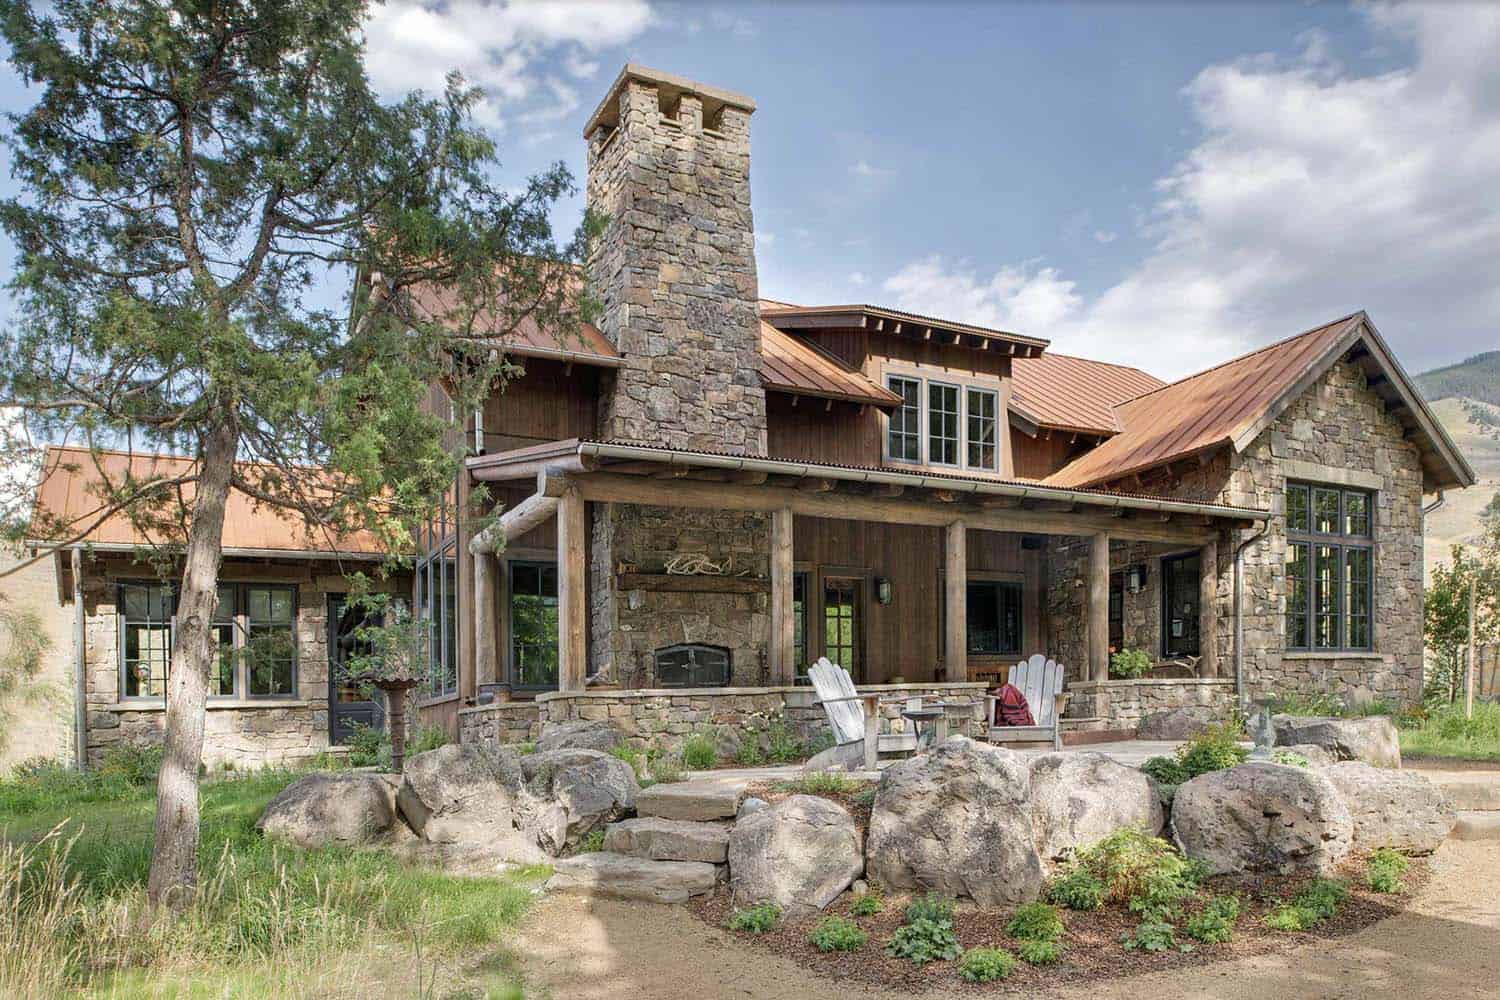 See a phenomenal mountain rustic dream home in Paradise Valley, Montana